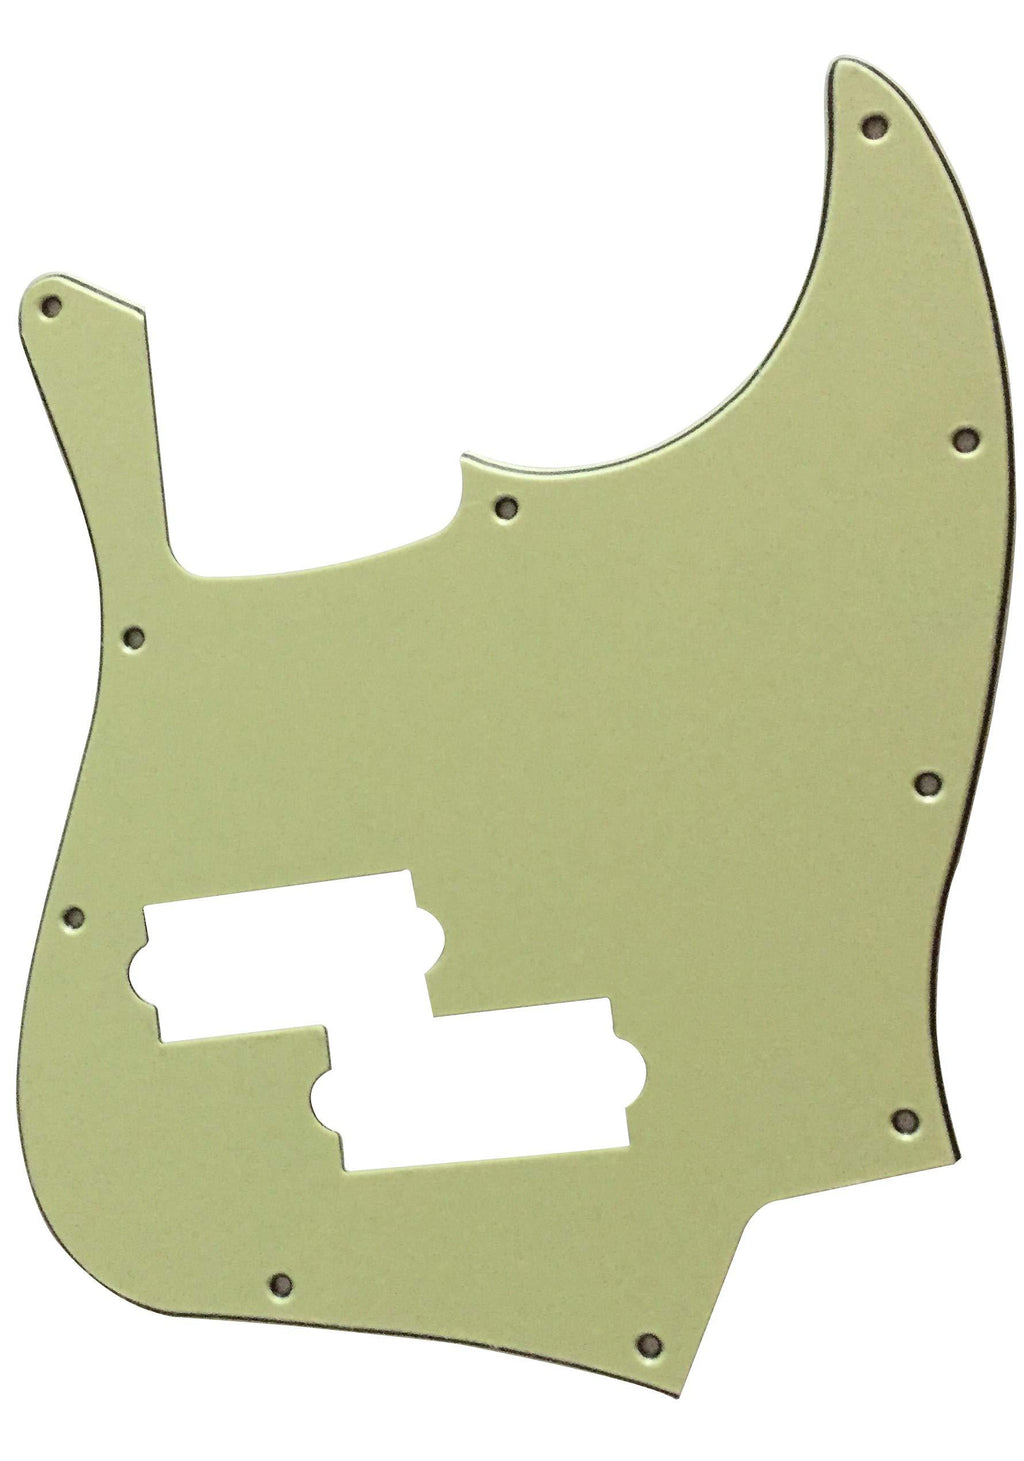 Custom Guitar Pickguard For Top Jazz Bass With PB Pickup Hole (3 Ply Vintage Green) 3 Ply Vintage Green